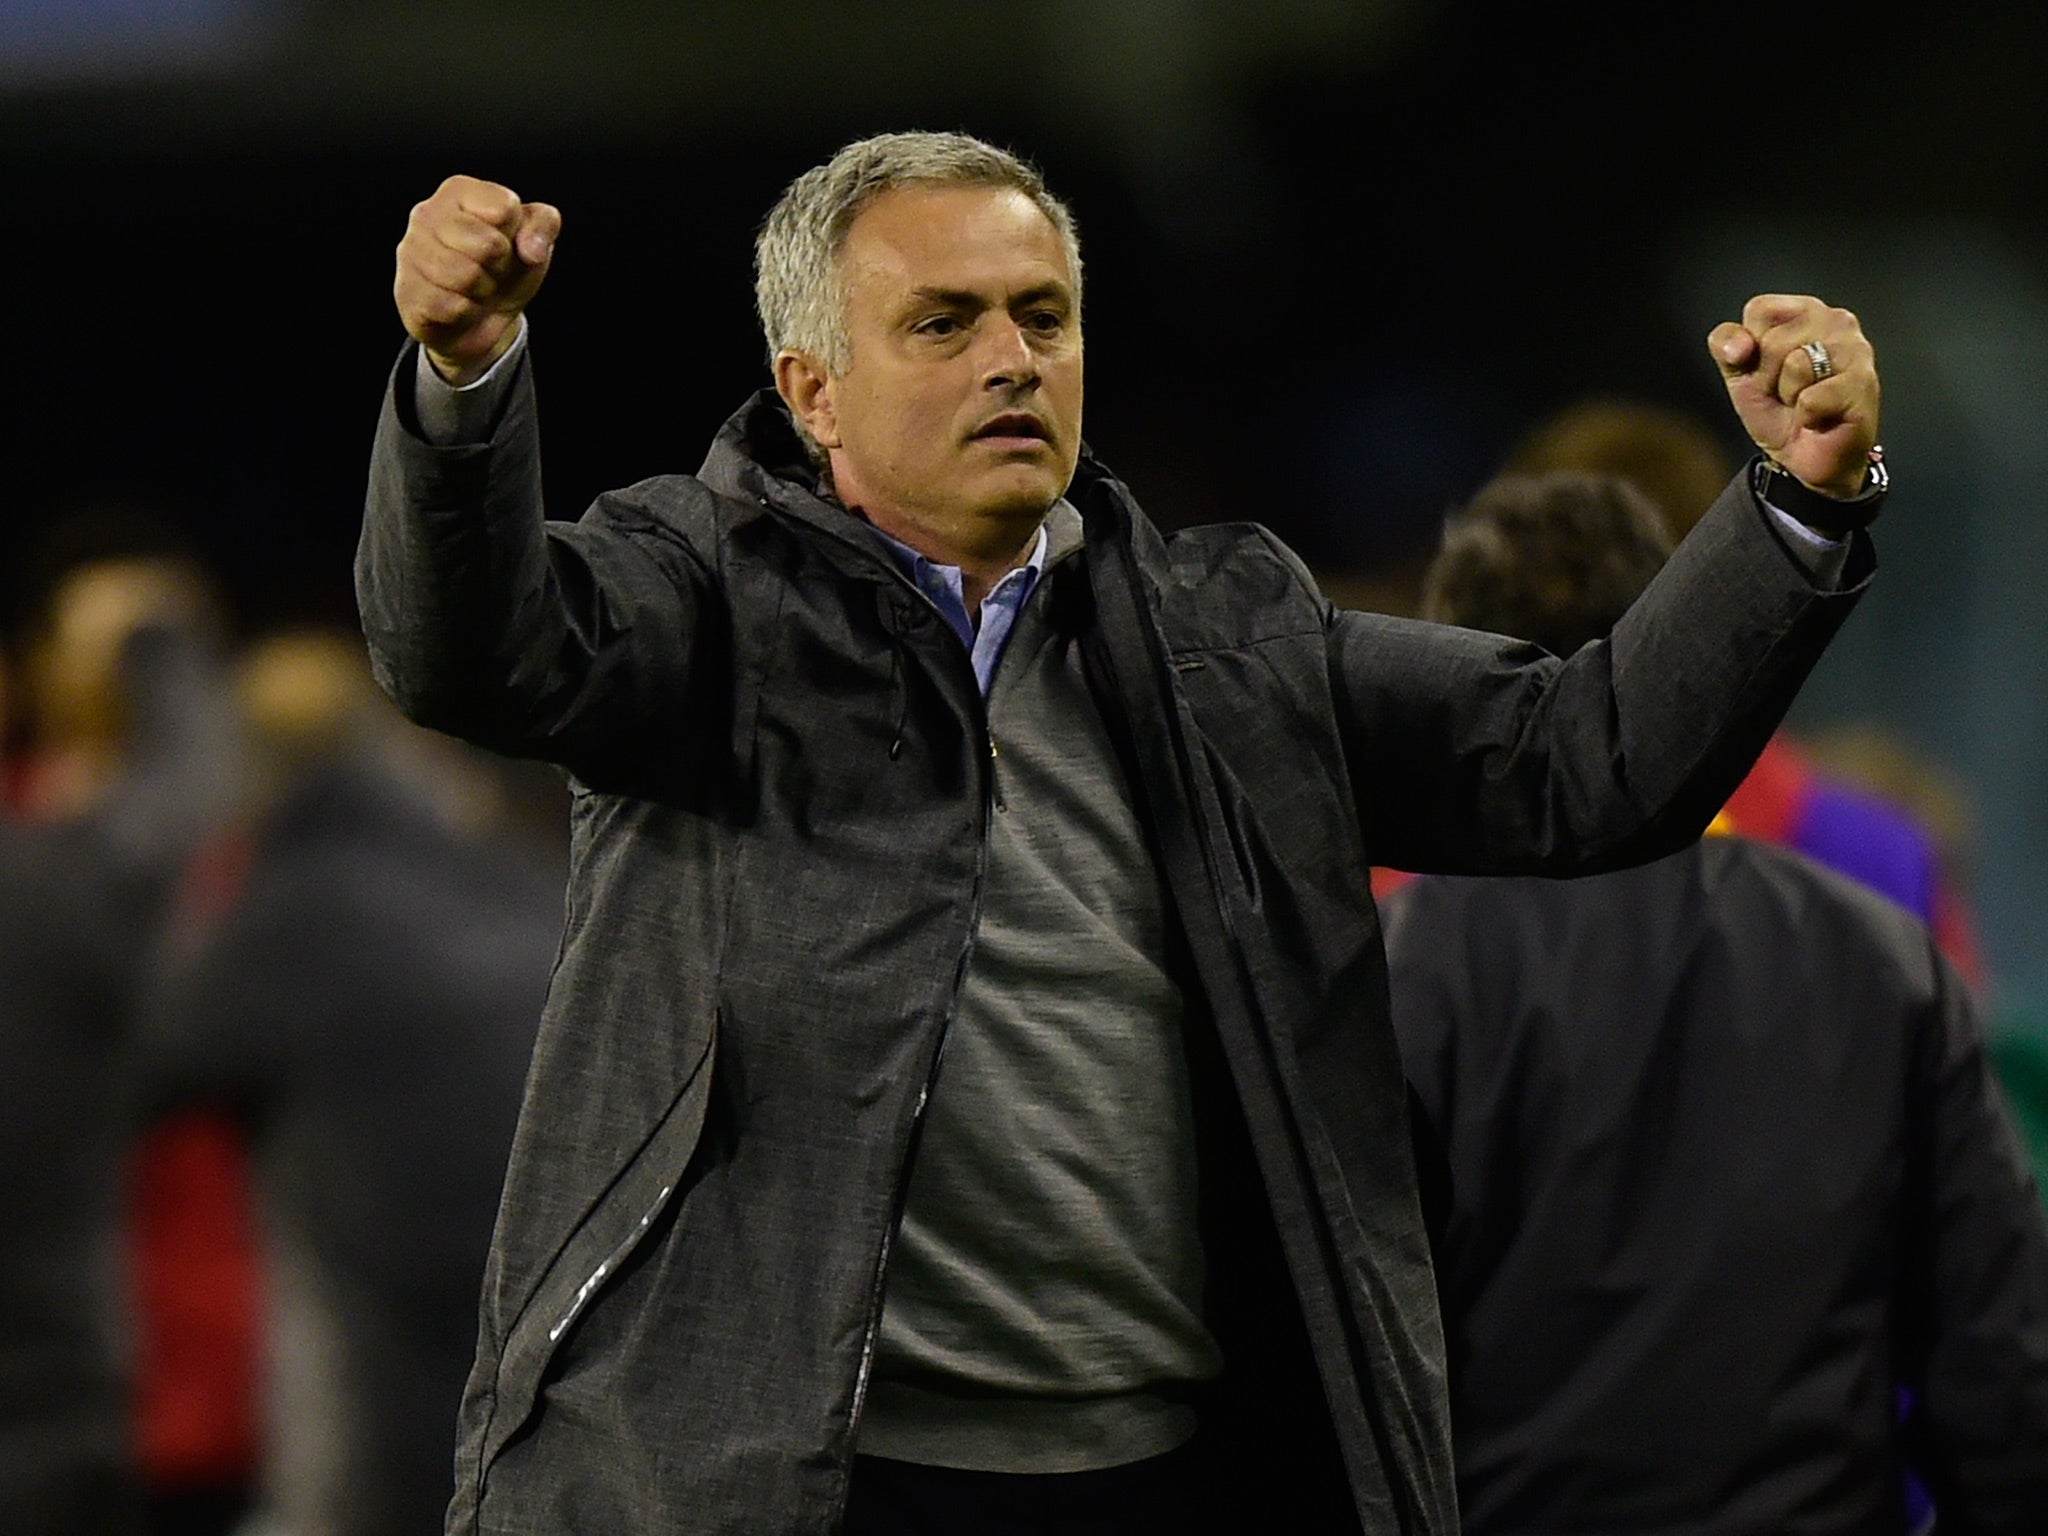 Jose Mourinho's side took a step closer to the Europa League final in Stockholm